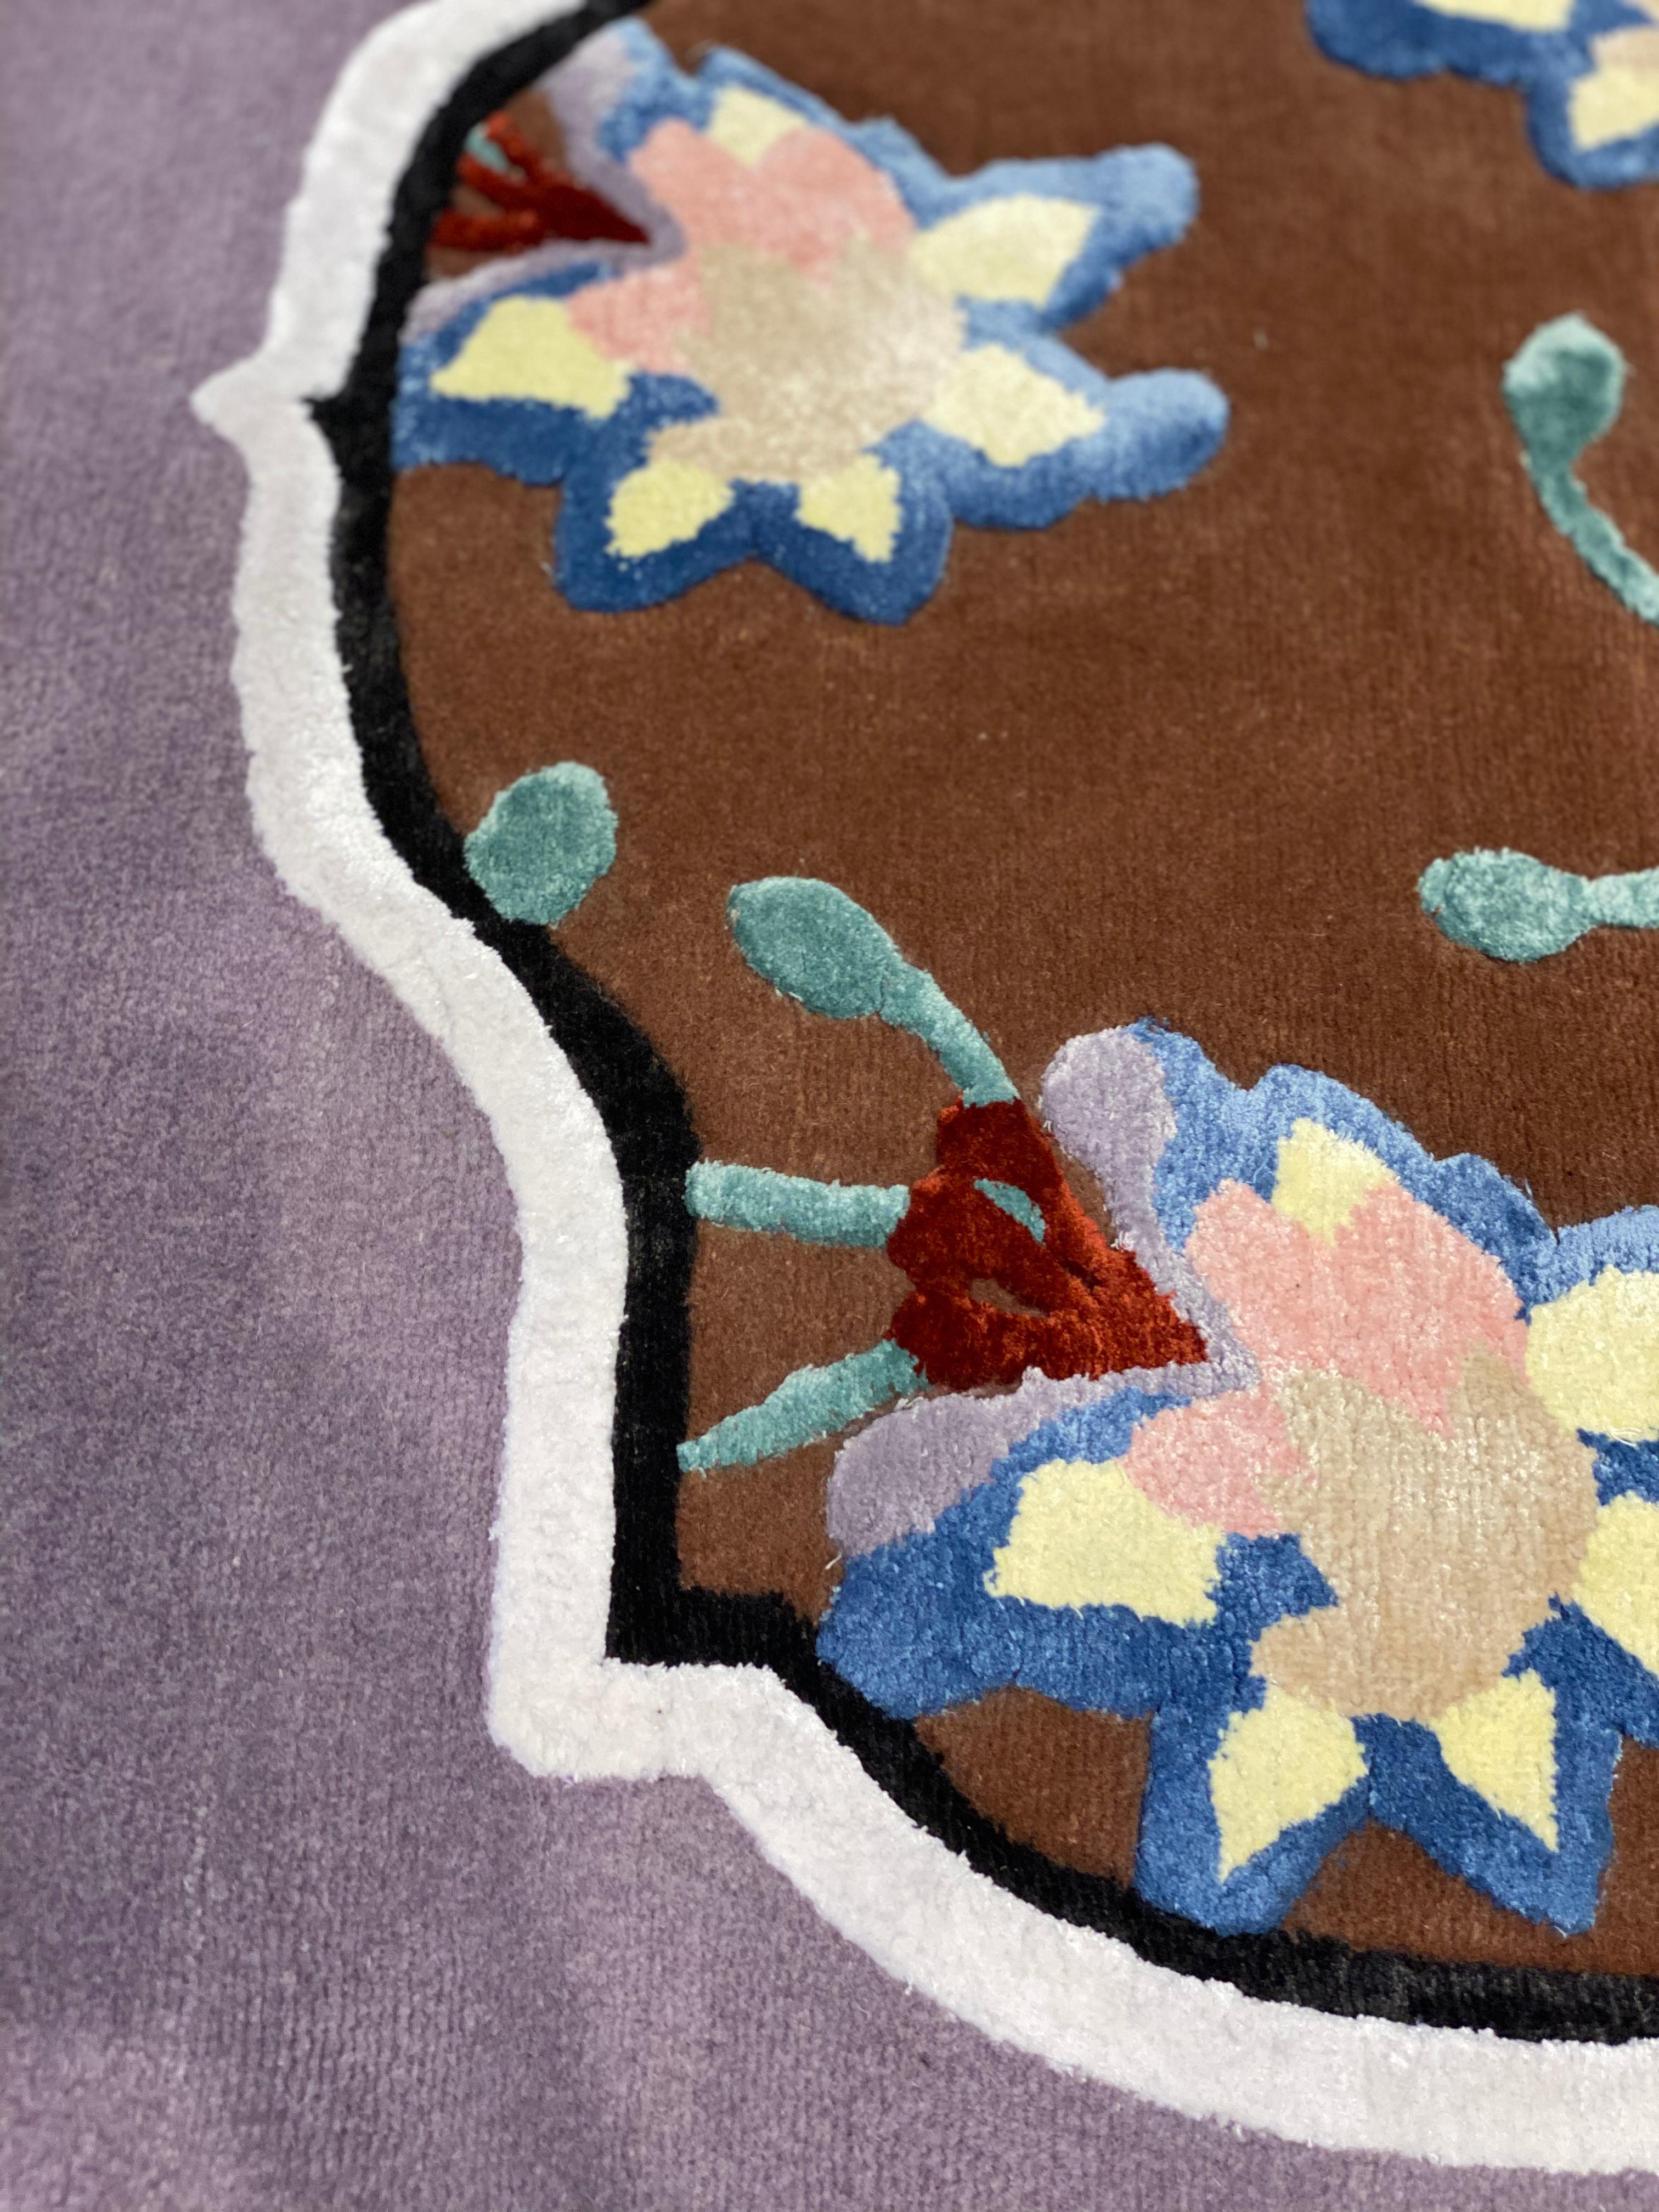 It’s a playful hand-knotted rug made with Himalayan wool and natural silk, inspired by flora and organic shapes with vibrant colors and stylistic geometries that reflect artist’s eclectic vision and her personal take on interior design.

This rug